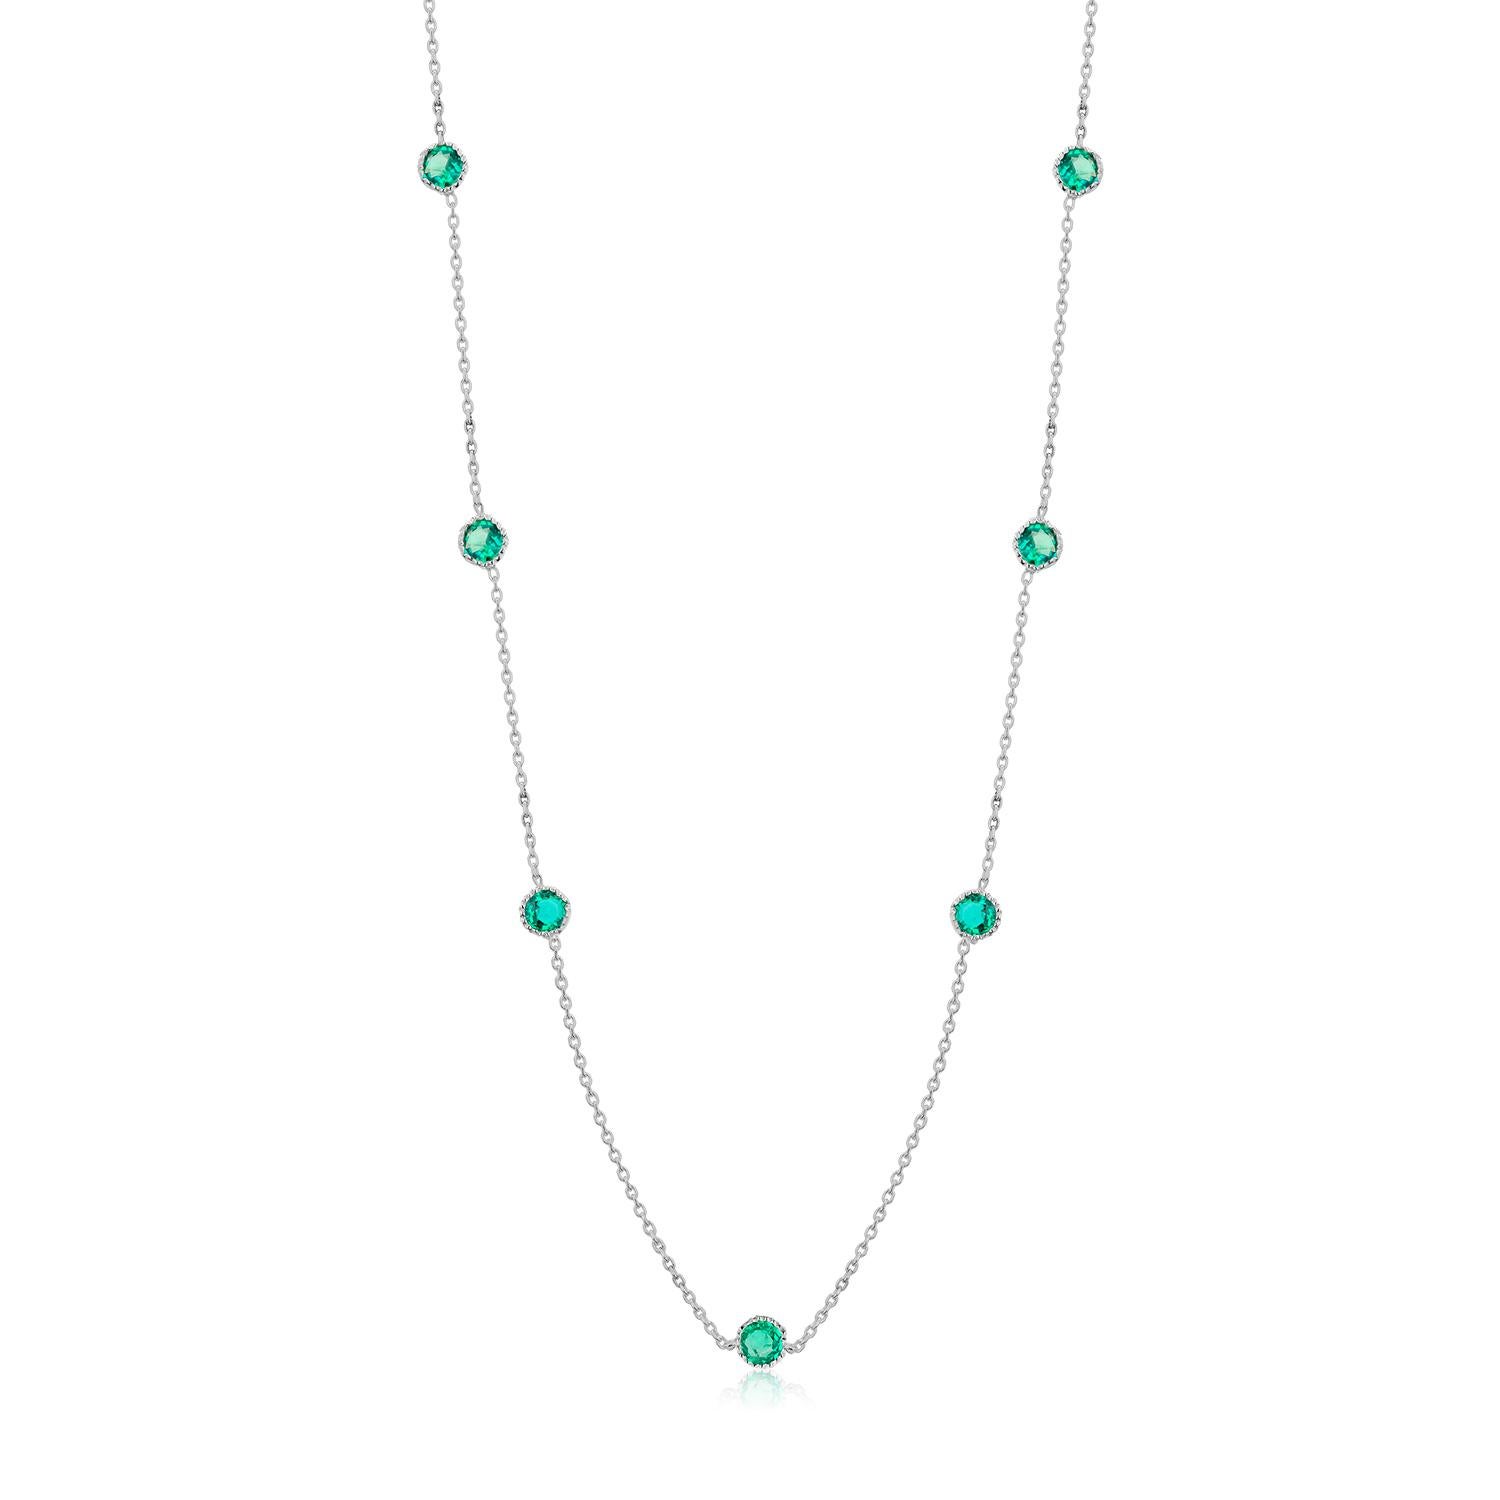 Contemporary Seven Bezel-Set Round Emerald White Gold Necklace Weighing 1.05 Carat